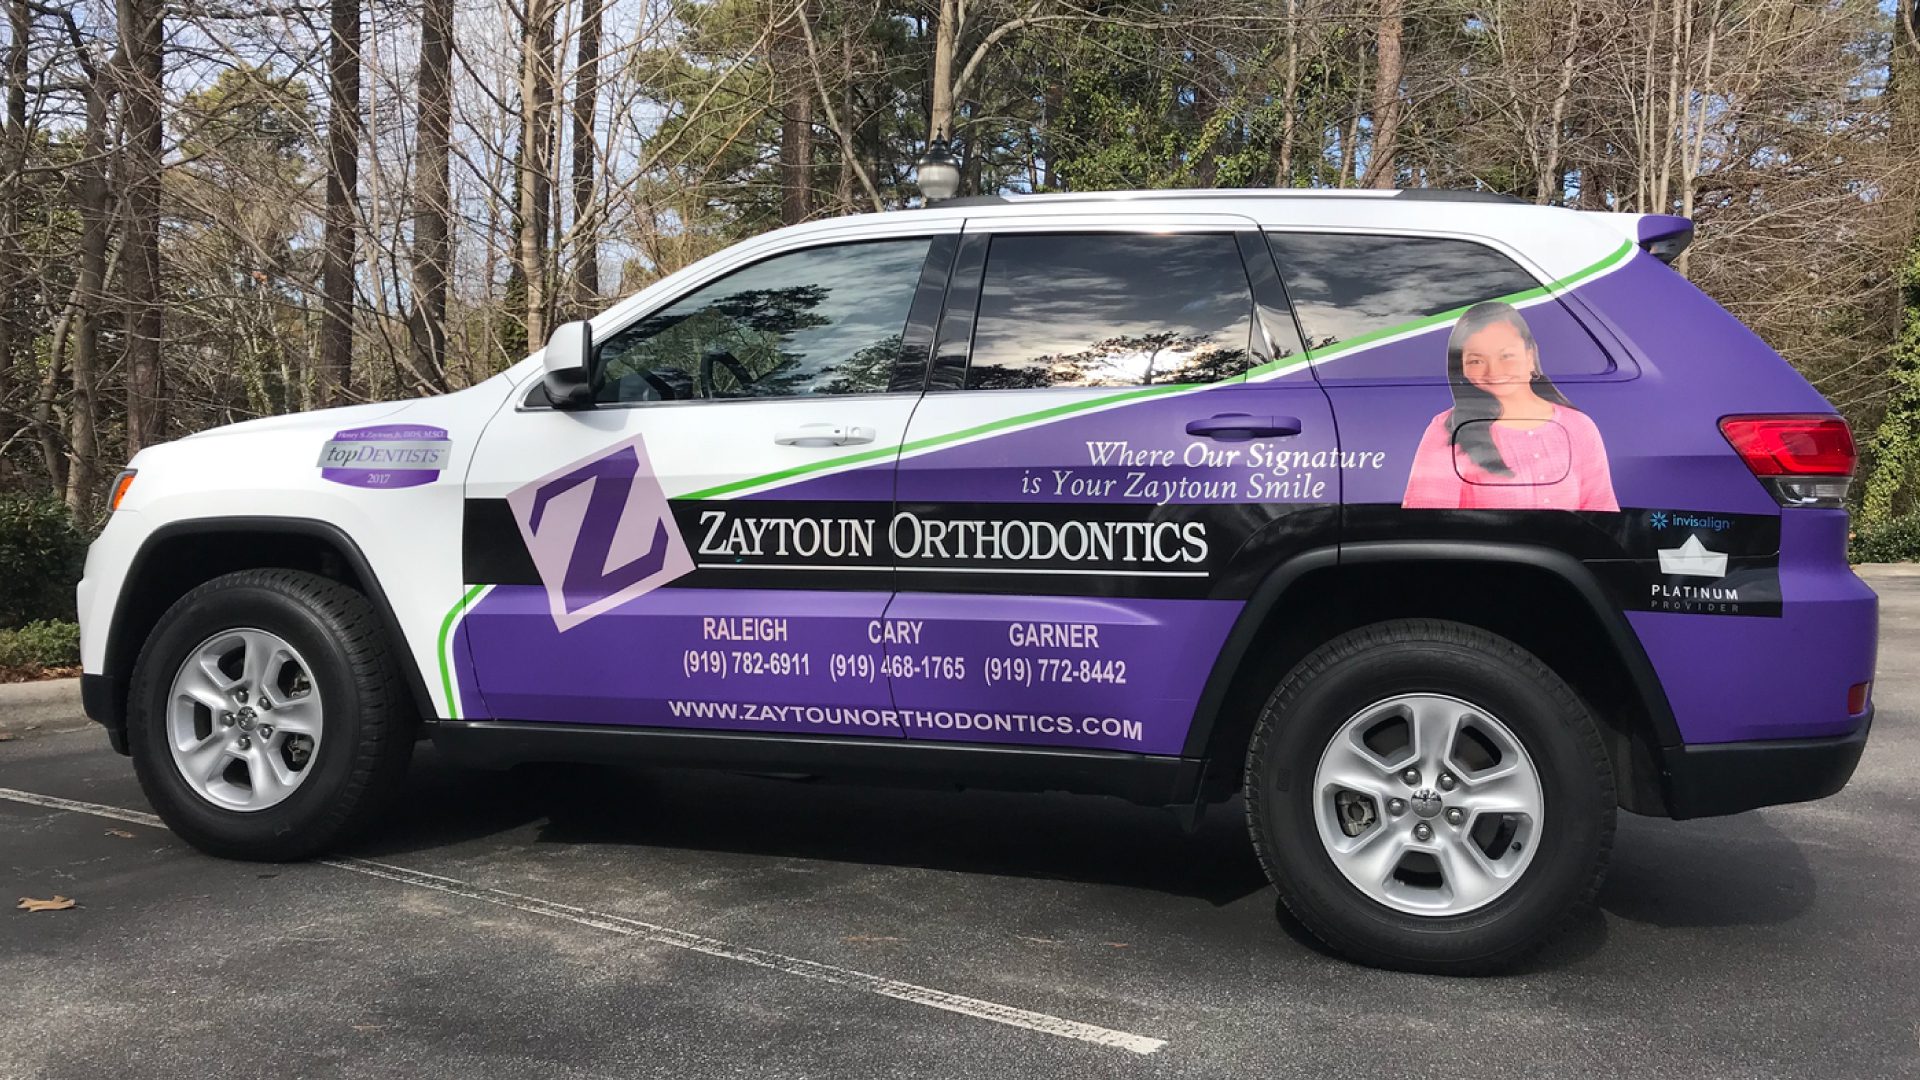 How effective is vehicle wraps for marketing your business?